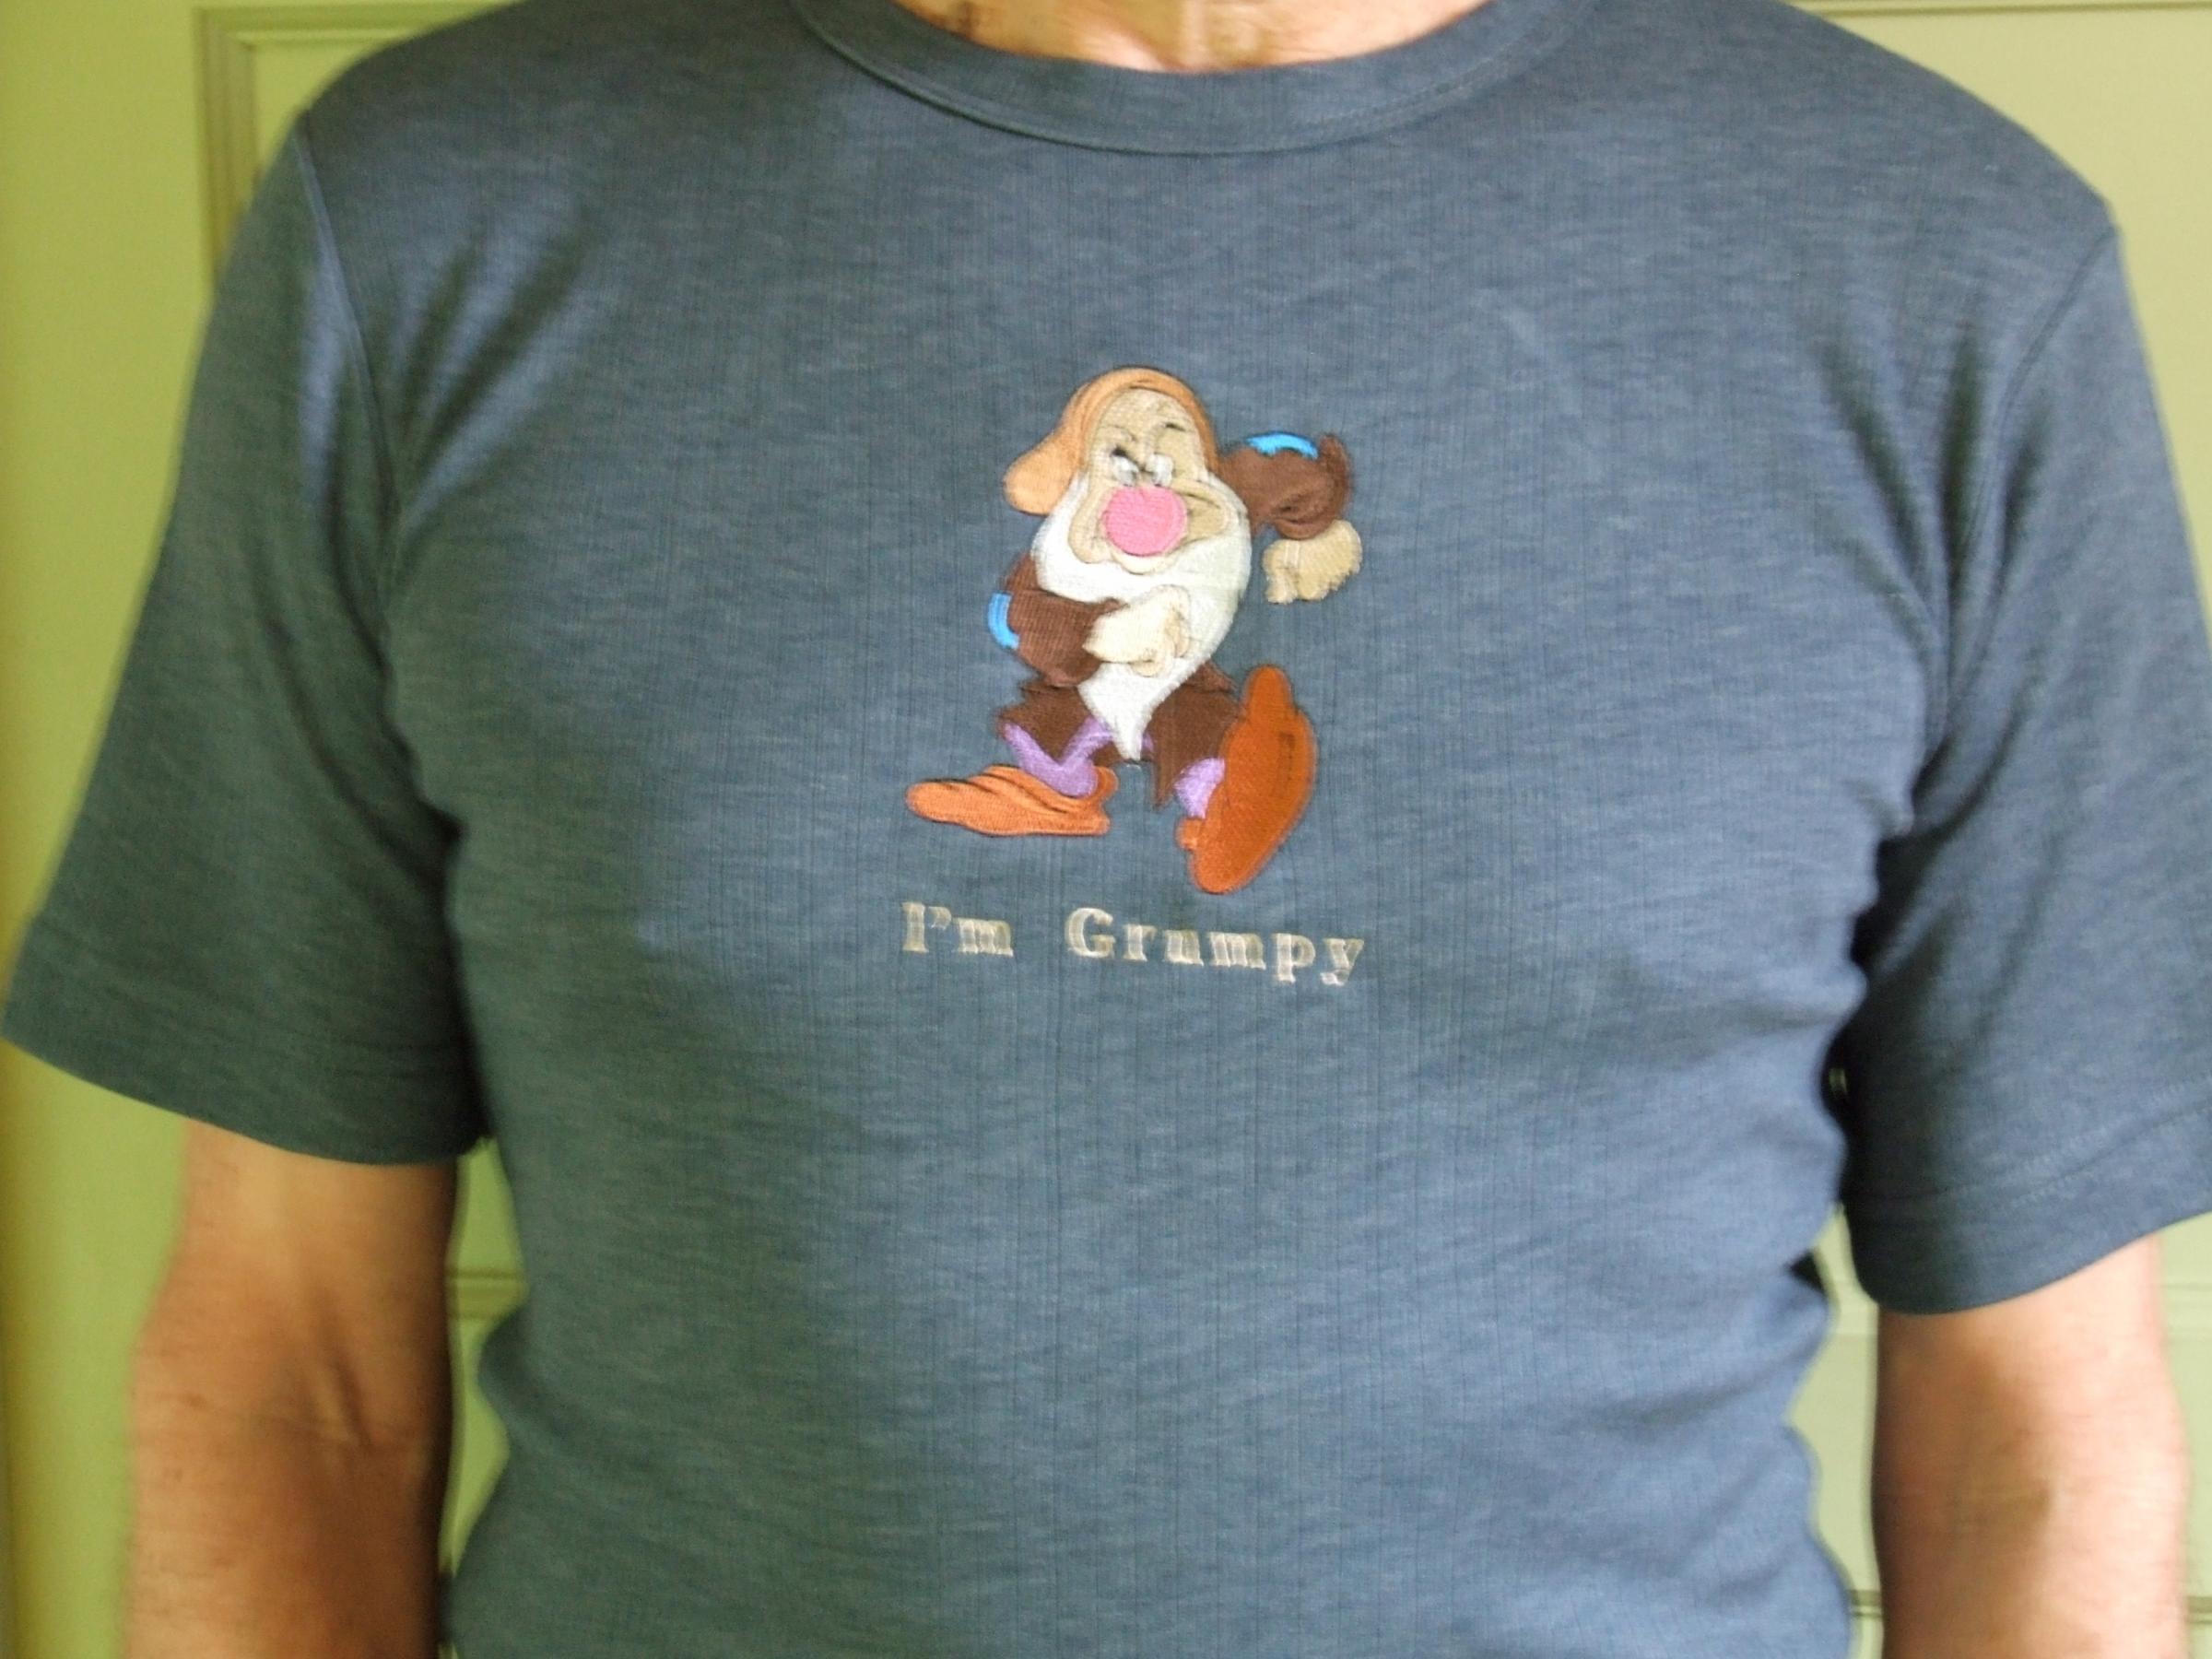 T-shirt with Grumpy embroidery design